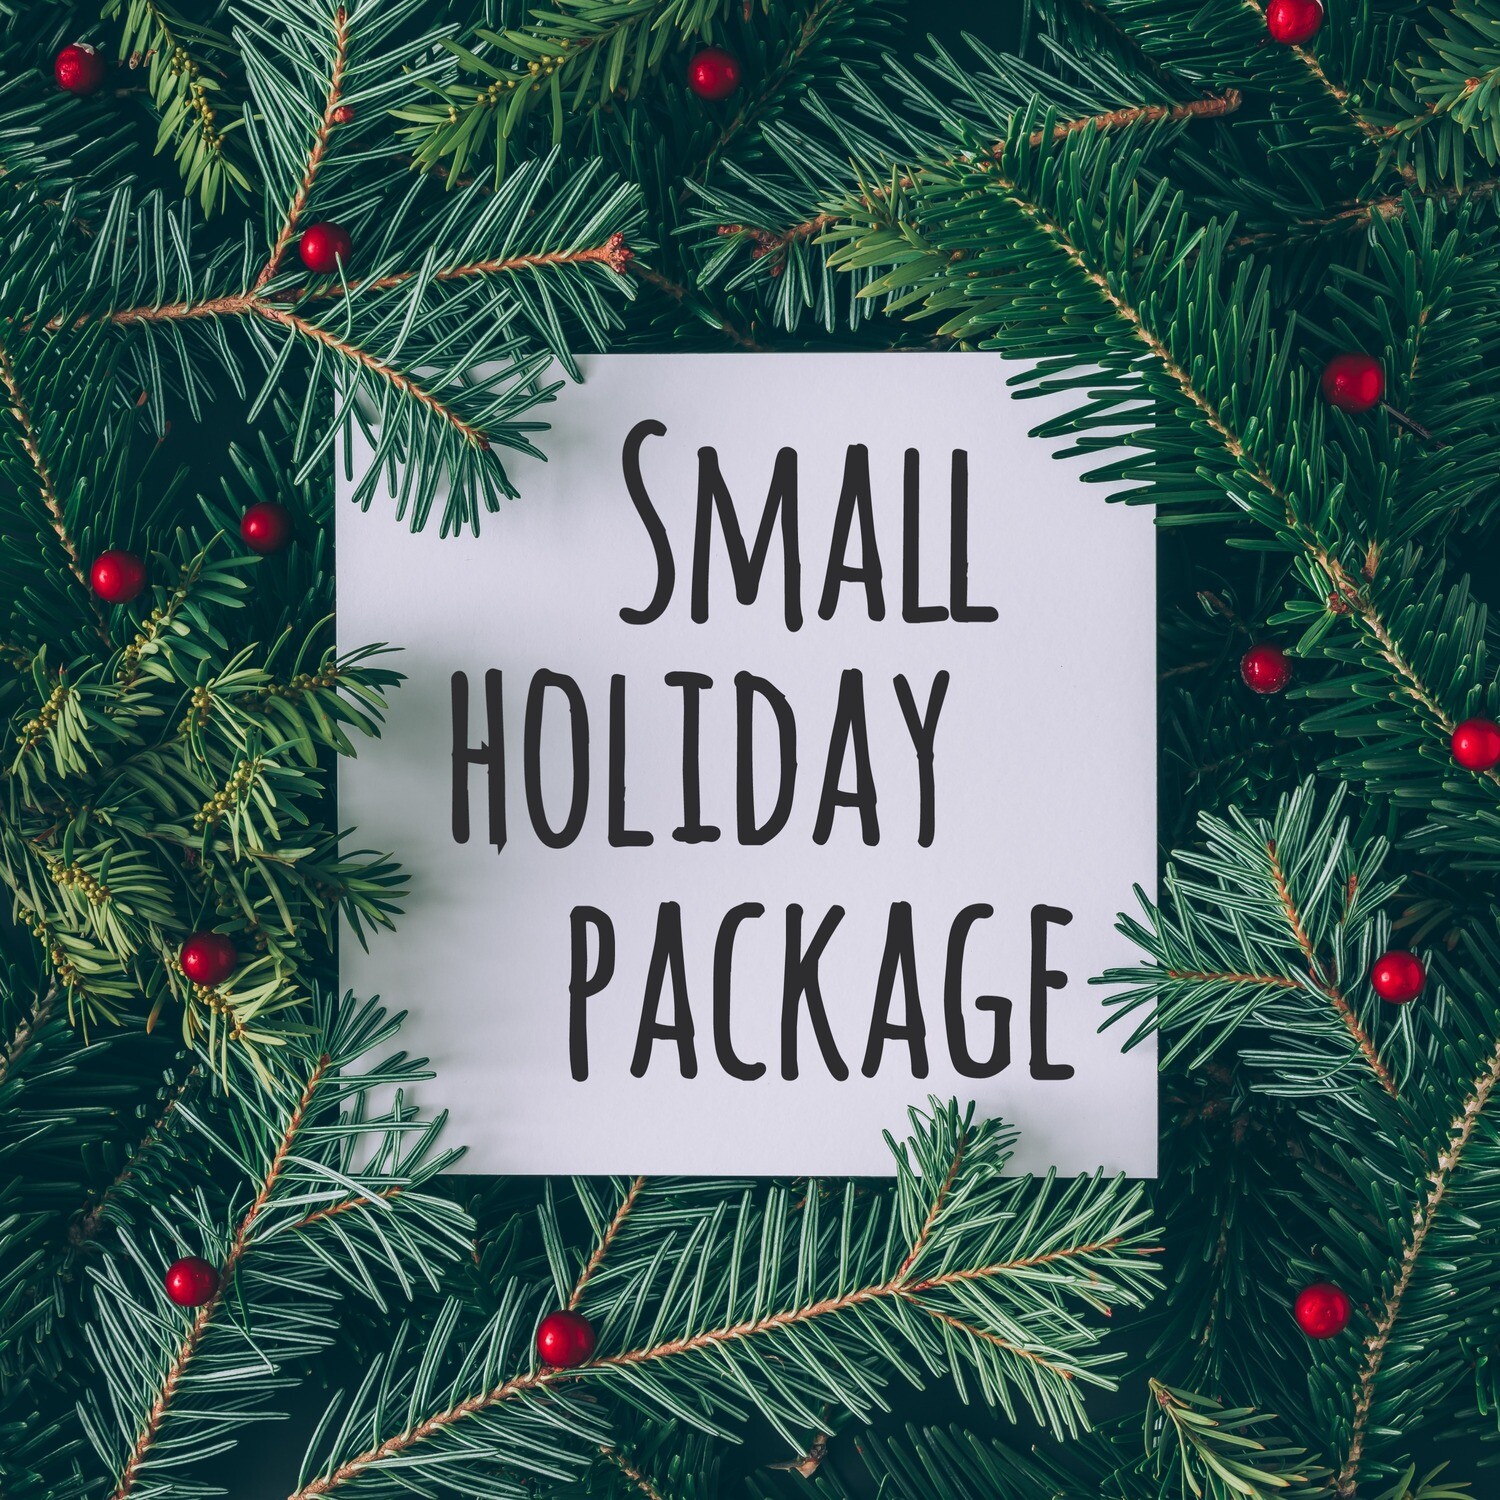 Small Holiday Package